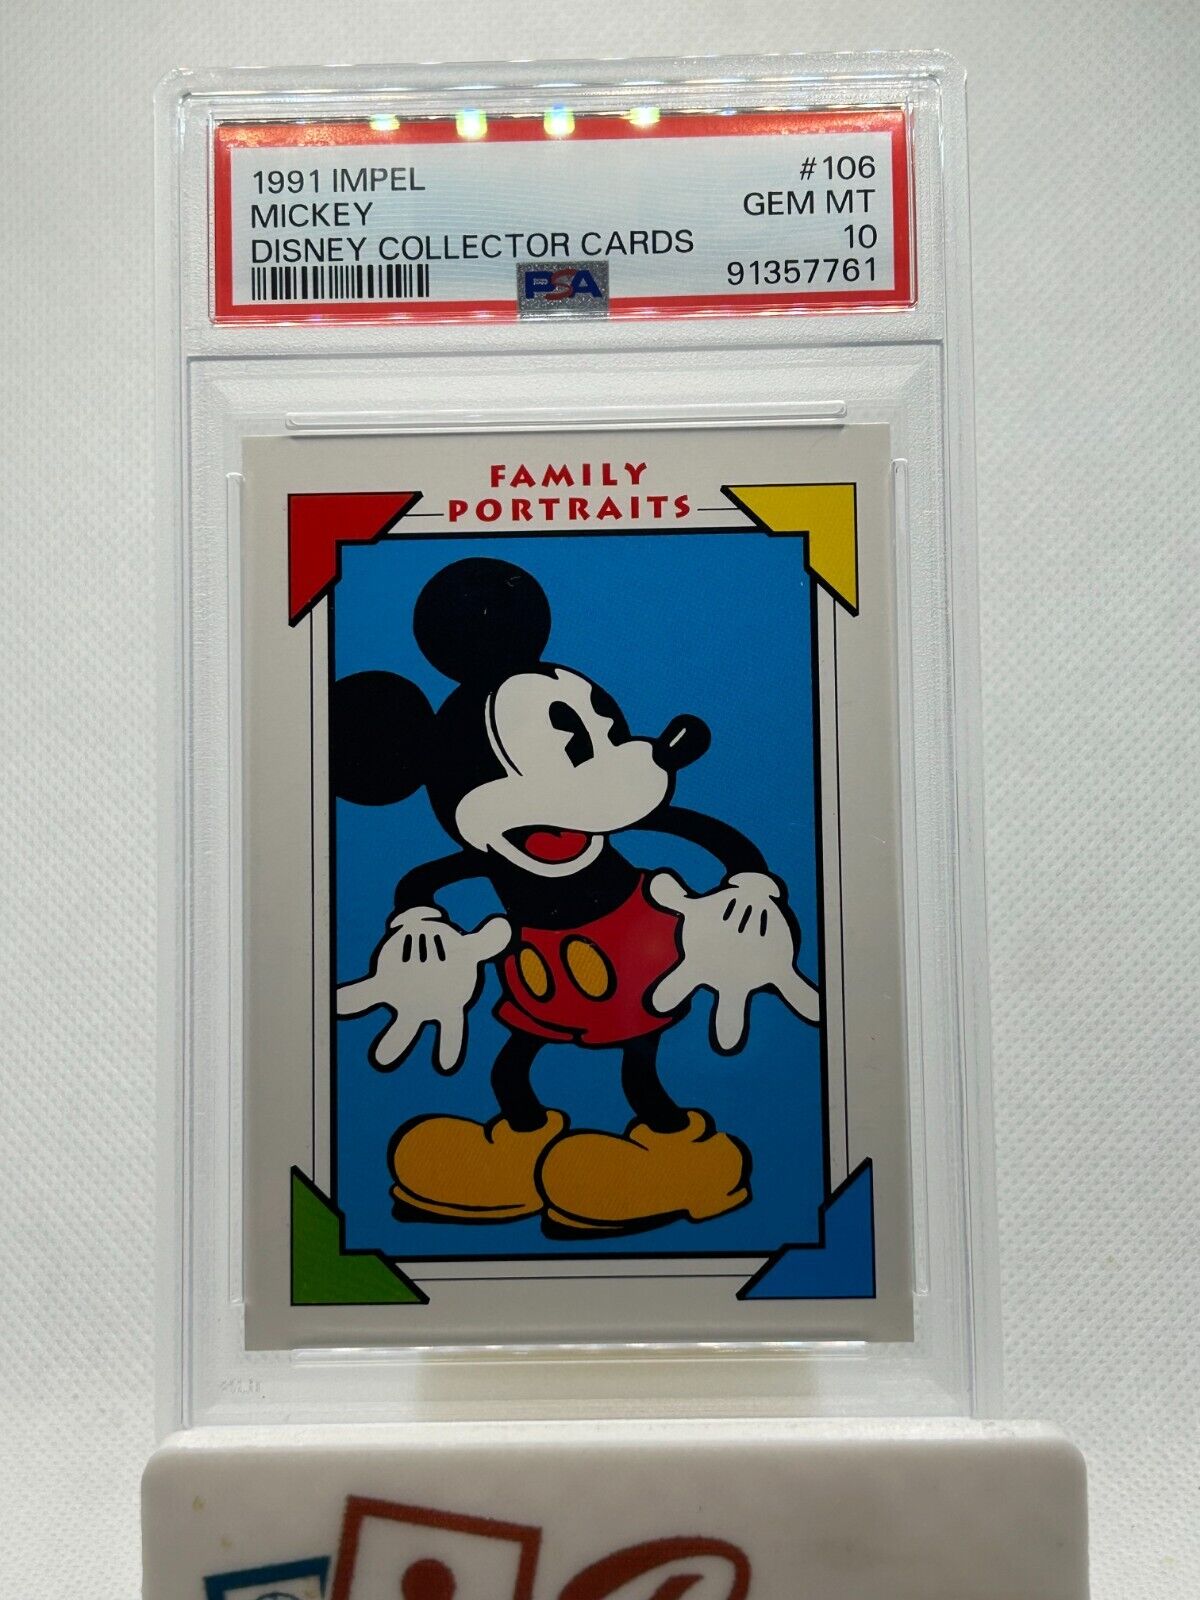 1991 Impel Disney Collector Cards #106 Mickey Mouse Family Portraits PSA 10